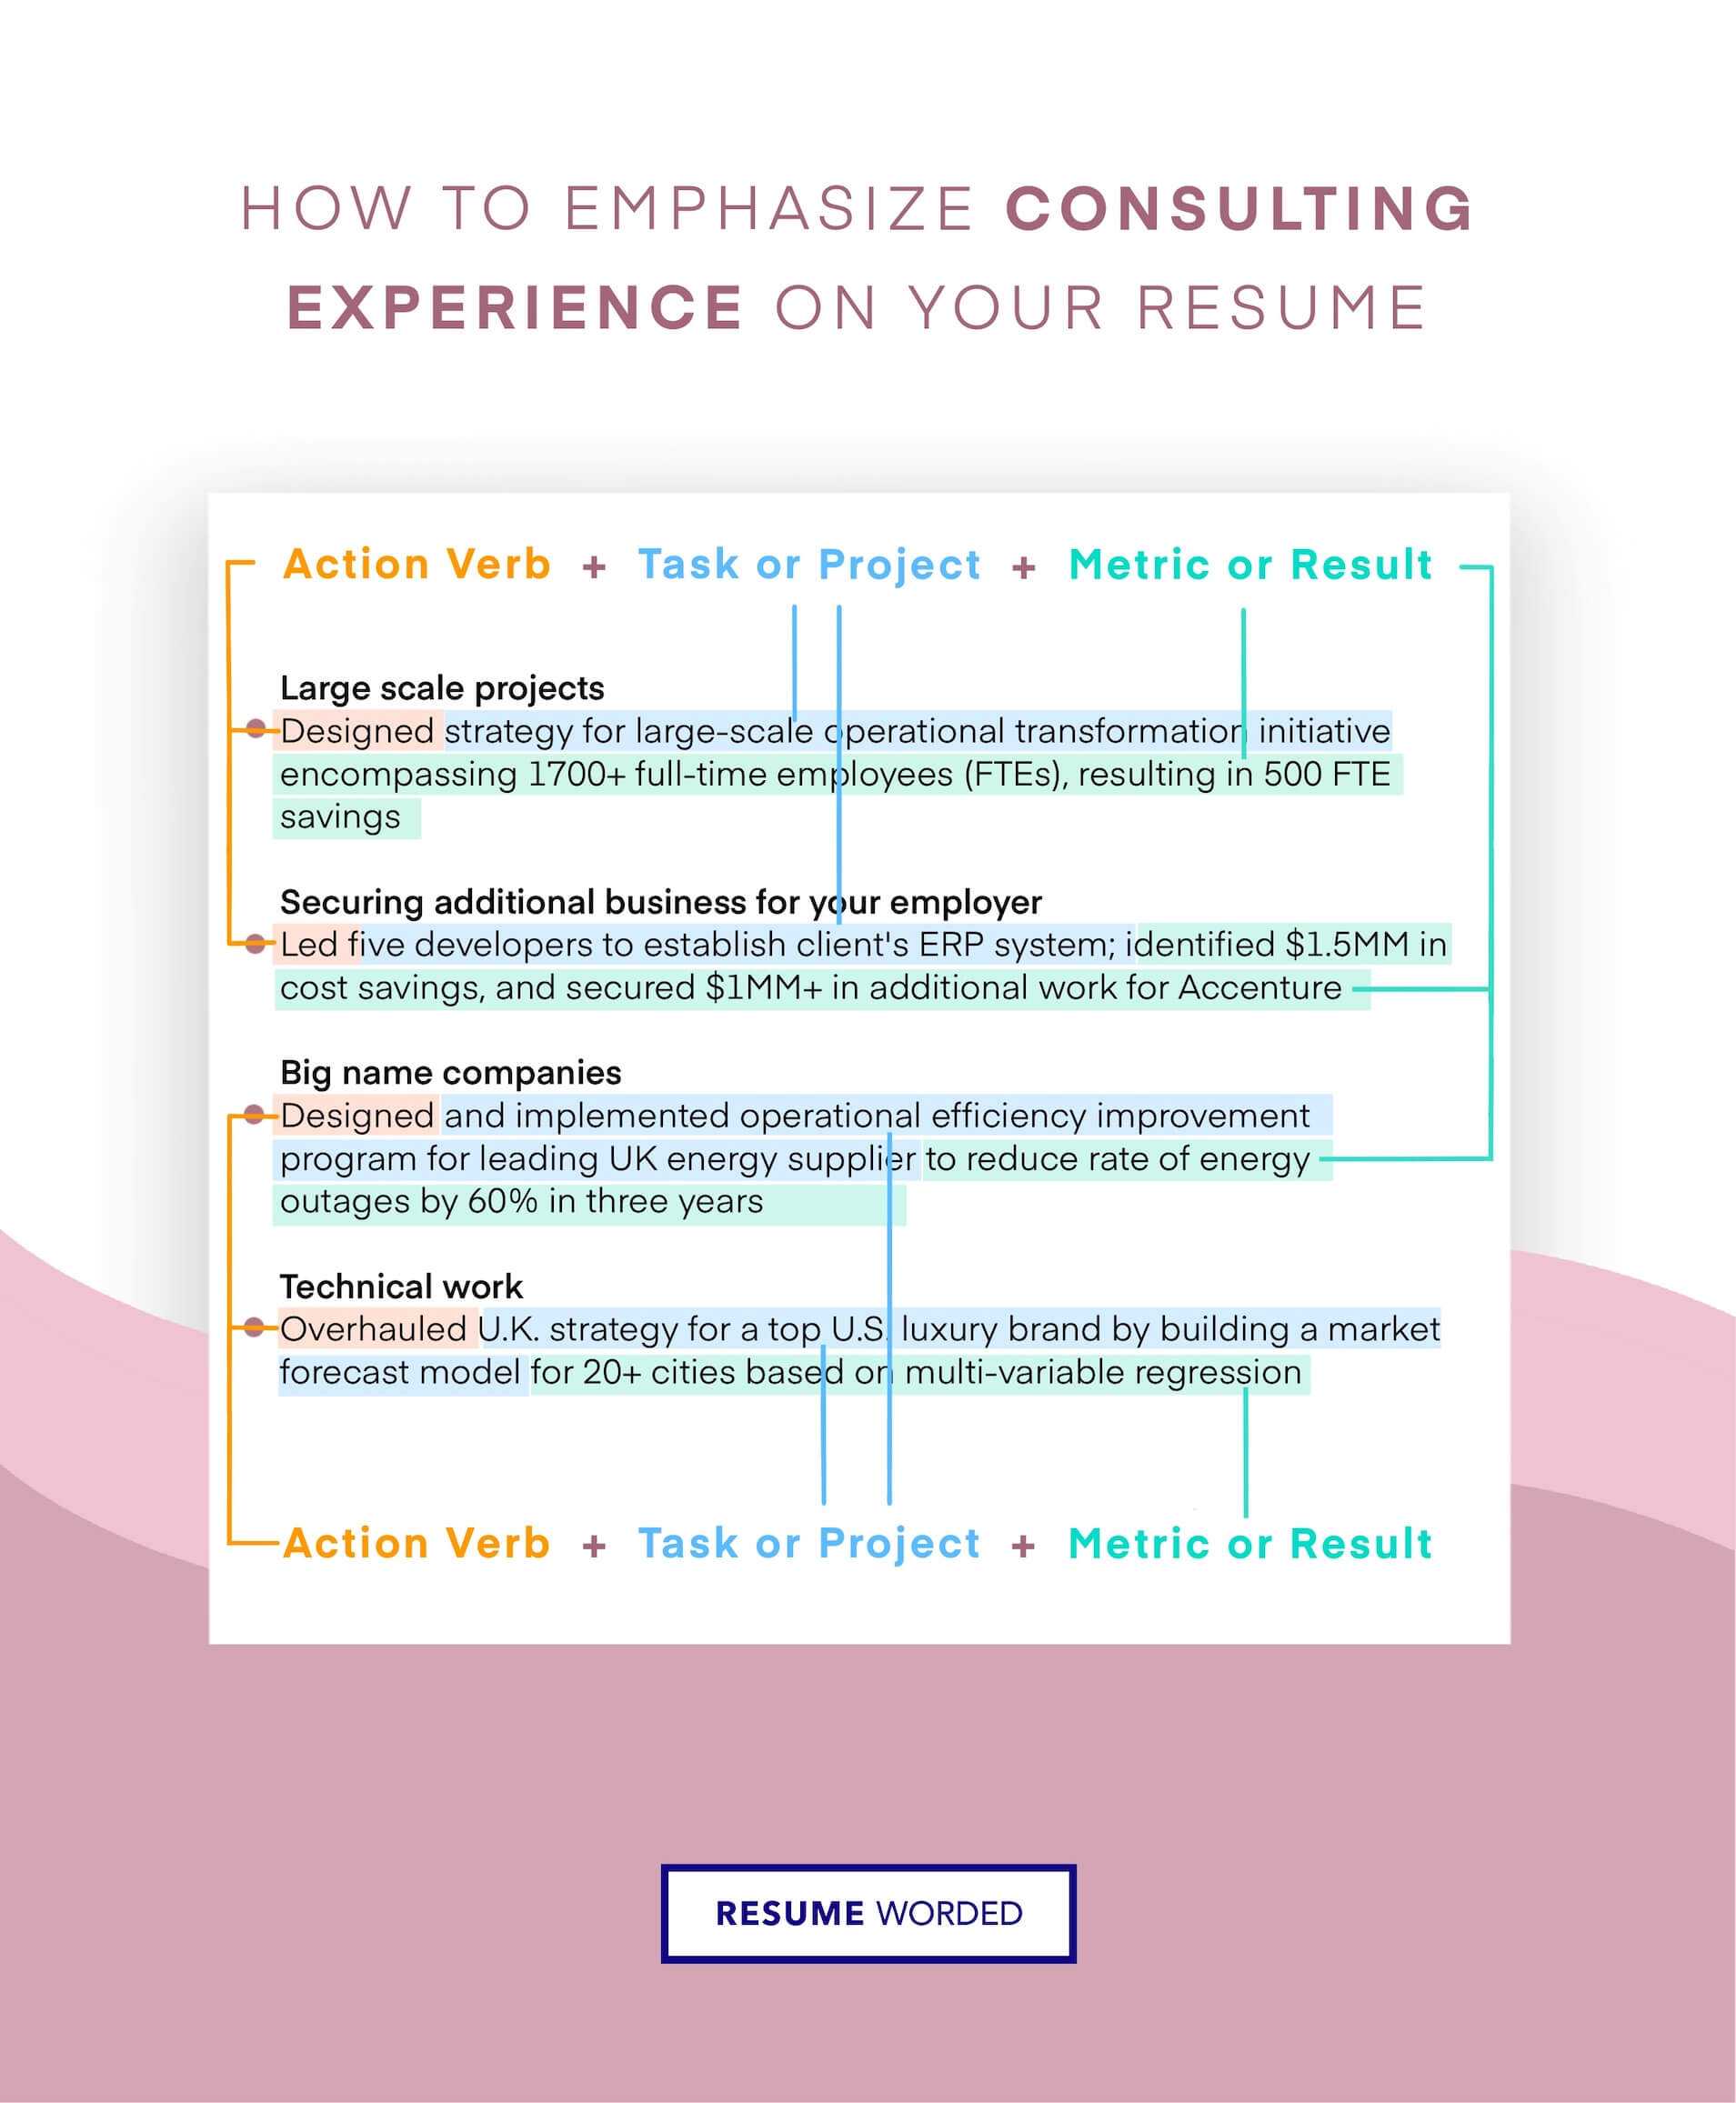 Showcase detailed consulting project experience - Consulting Manager CV